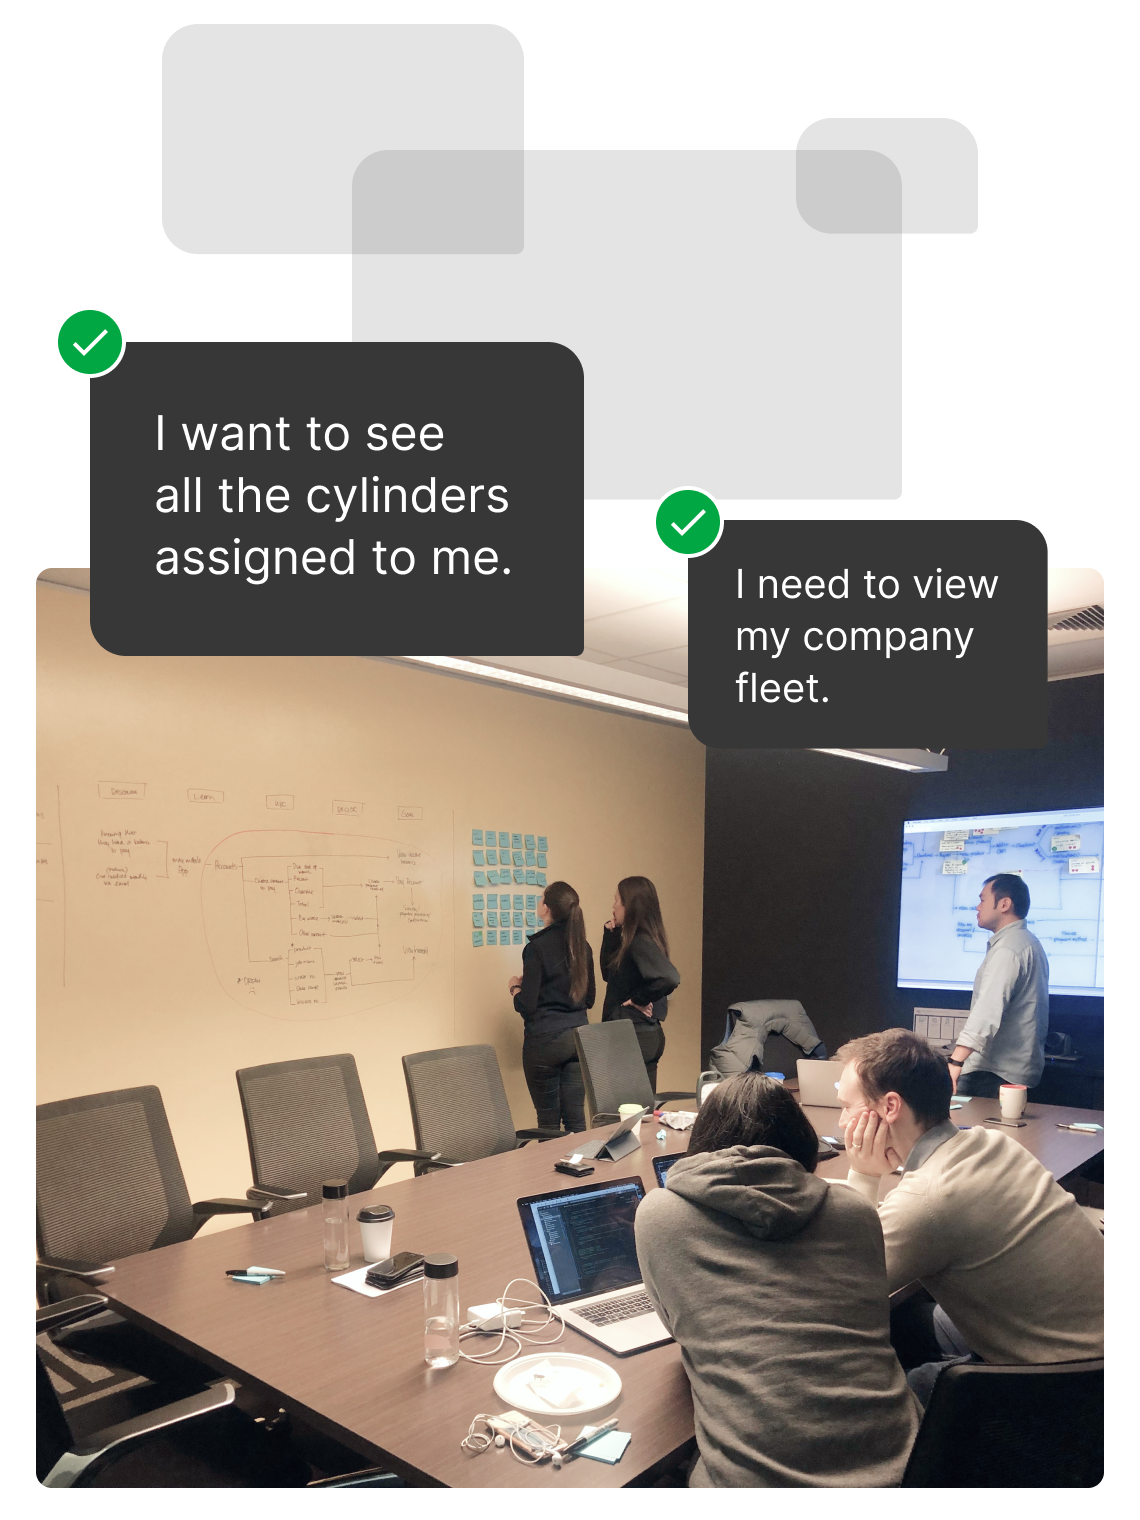 People in a room brainstorming, two speech bubbles with user input: "I want to see all the cylinders assigned to me" and "I need to view my company fleet"